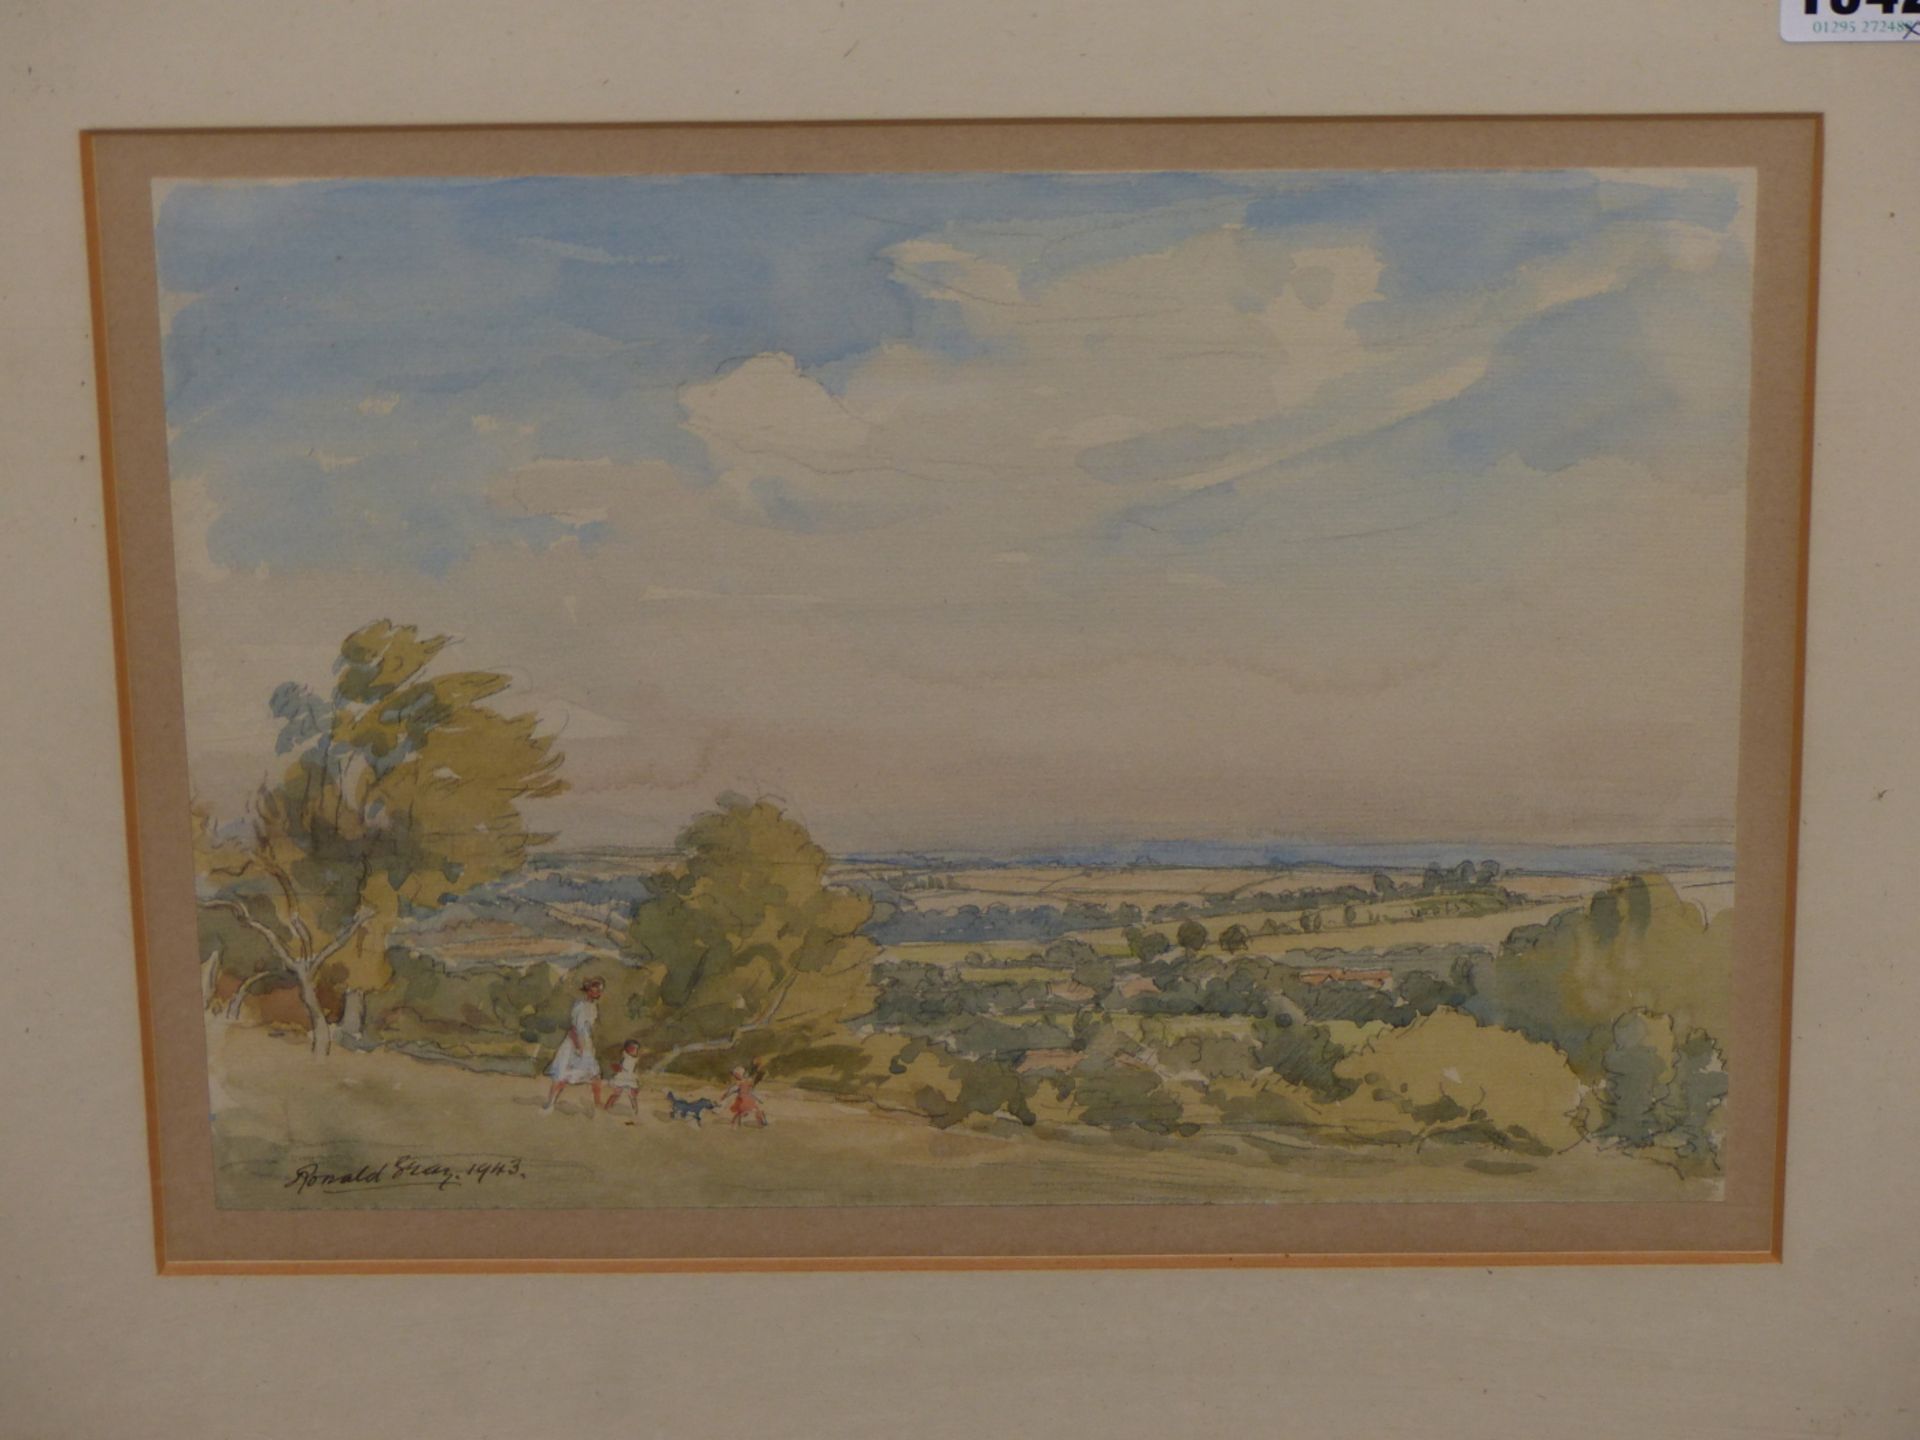 RONALD GRAY (1868-1951) AN AFTERNOON WALK, WATERCOLOUR. SIGNED L/L AND DATED 1943. 30 X 22 cm. - Image 5 of 7